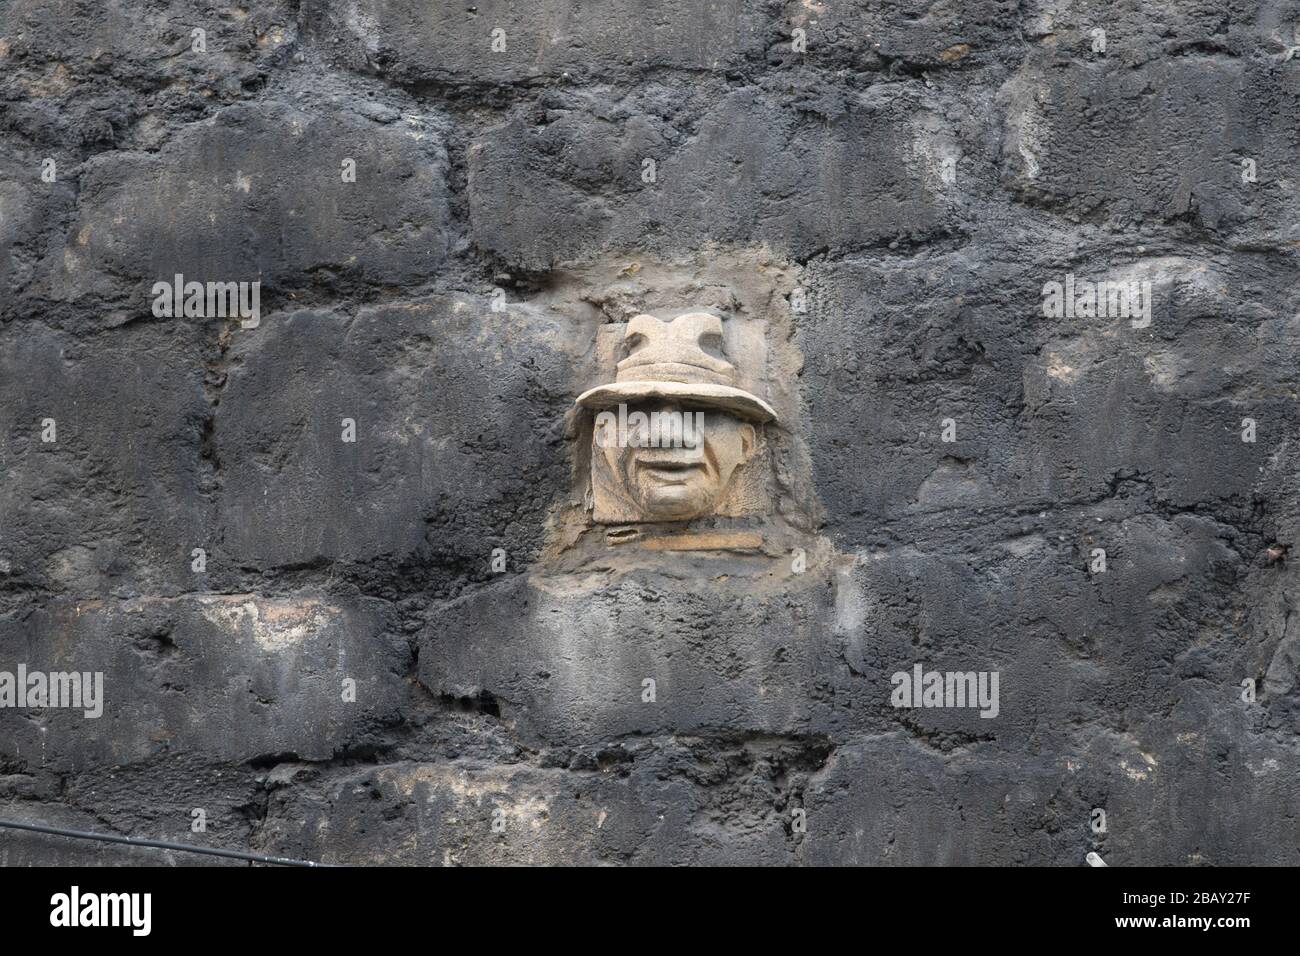 A stone face from The Great Wall of Walcot project in Walcot Street, Bath, United Kingdom. Stock Photo